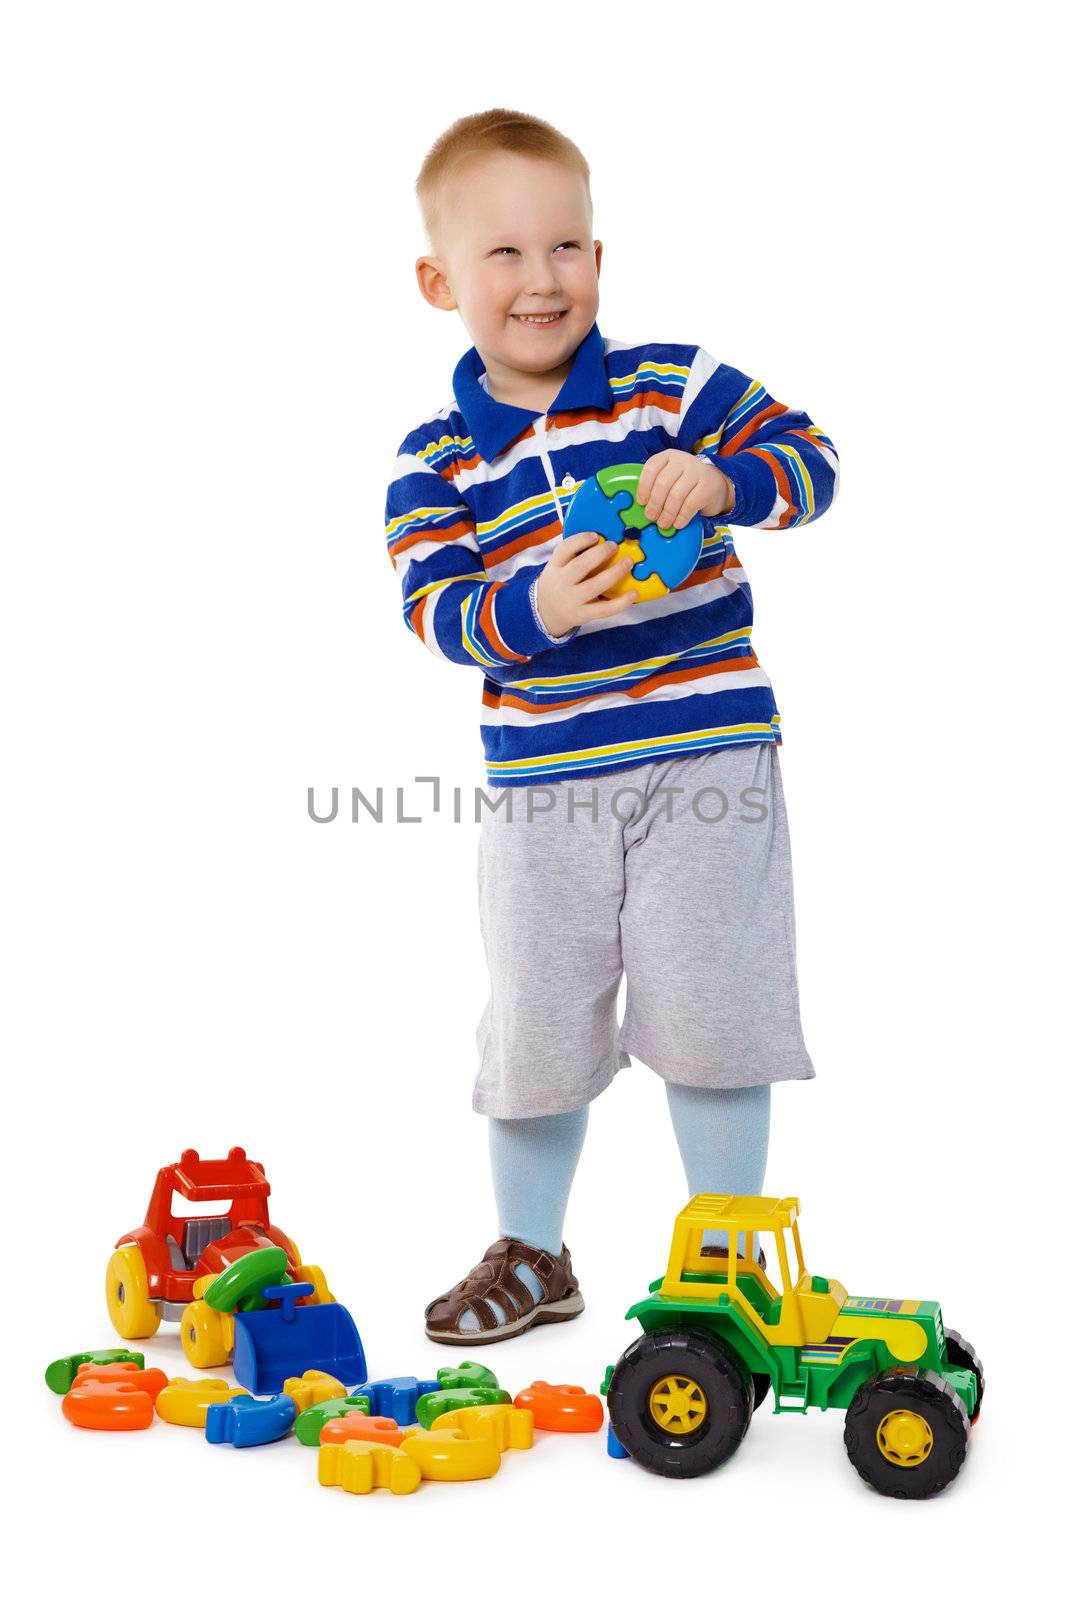 A child playing with plastic toys isolated on white background